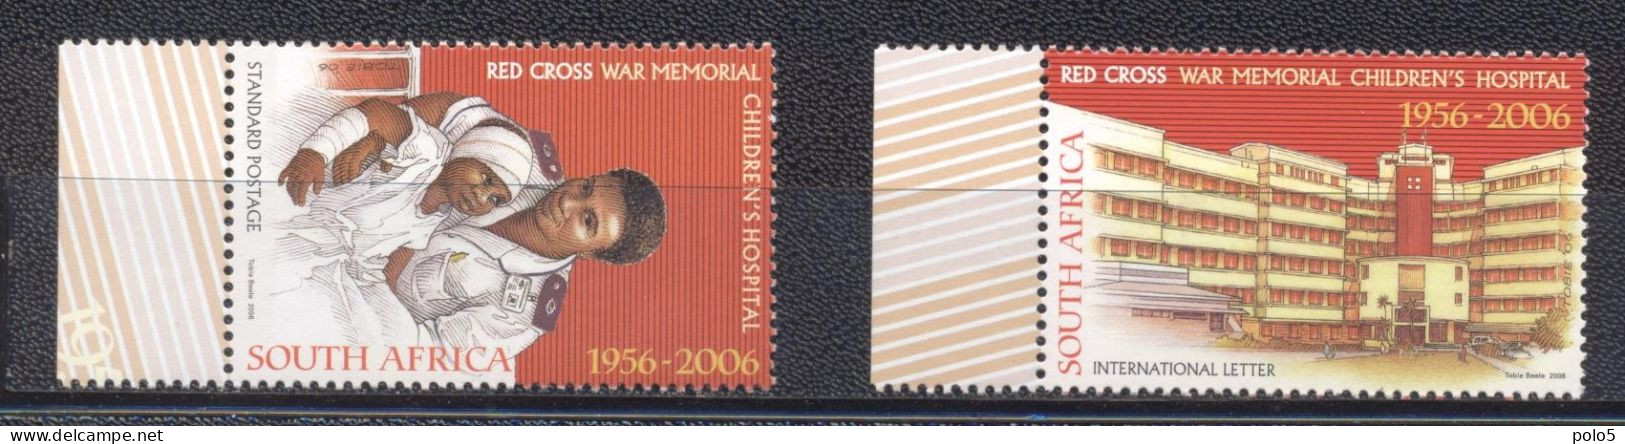 RSA 2006- The 50 Th Anniversary Of Red Cross War Memorial Children's Hospital Set (2v) - Unused Stamps